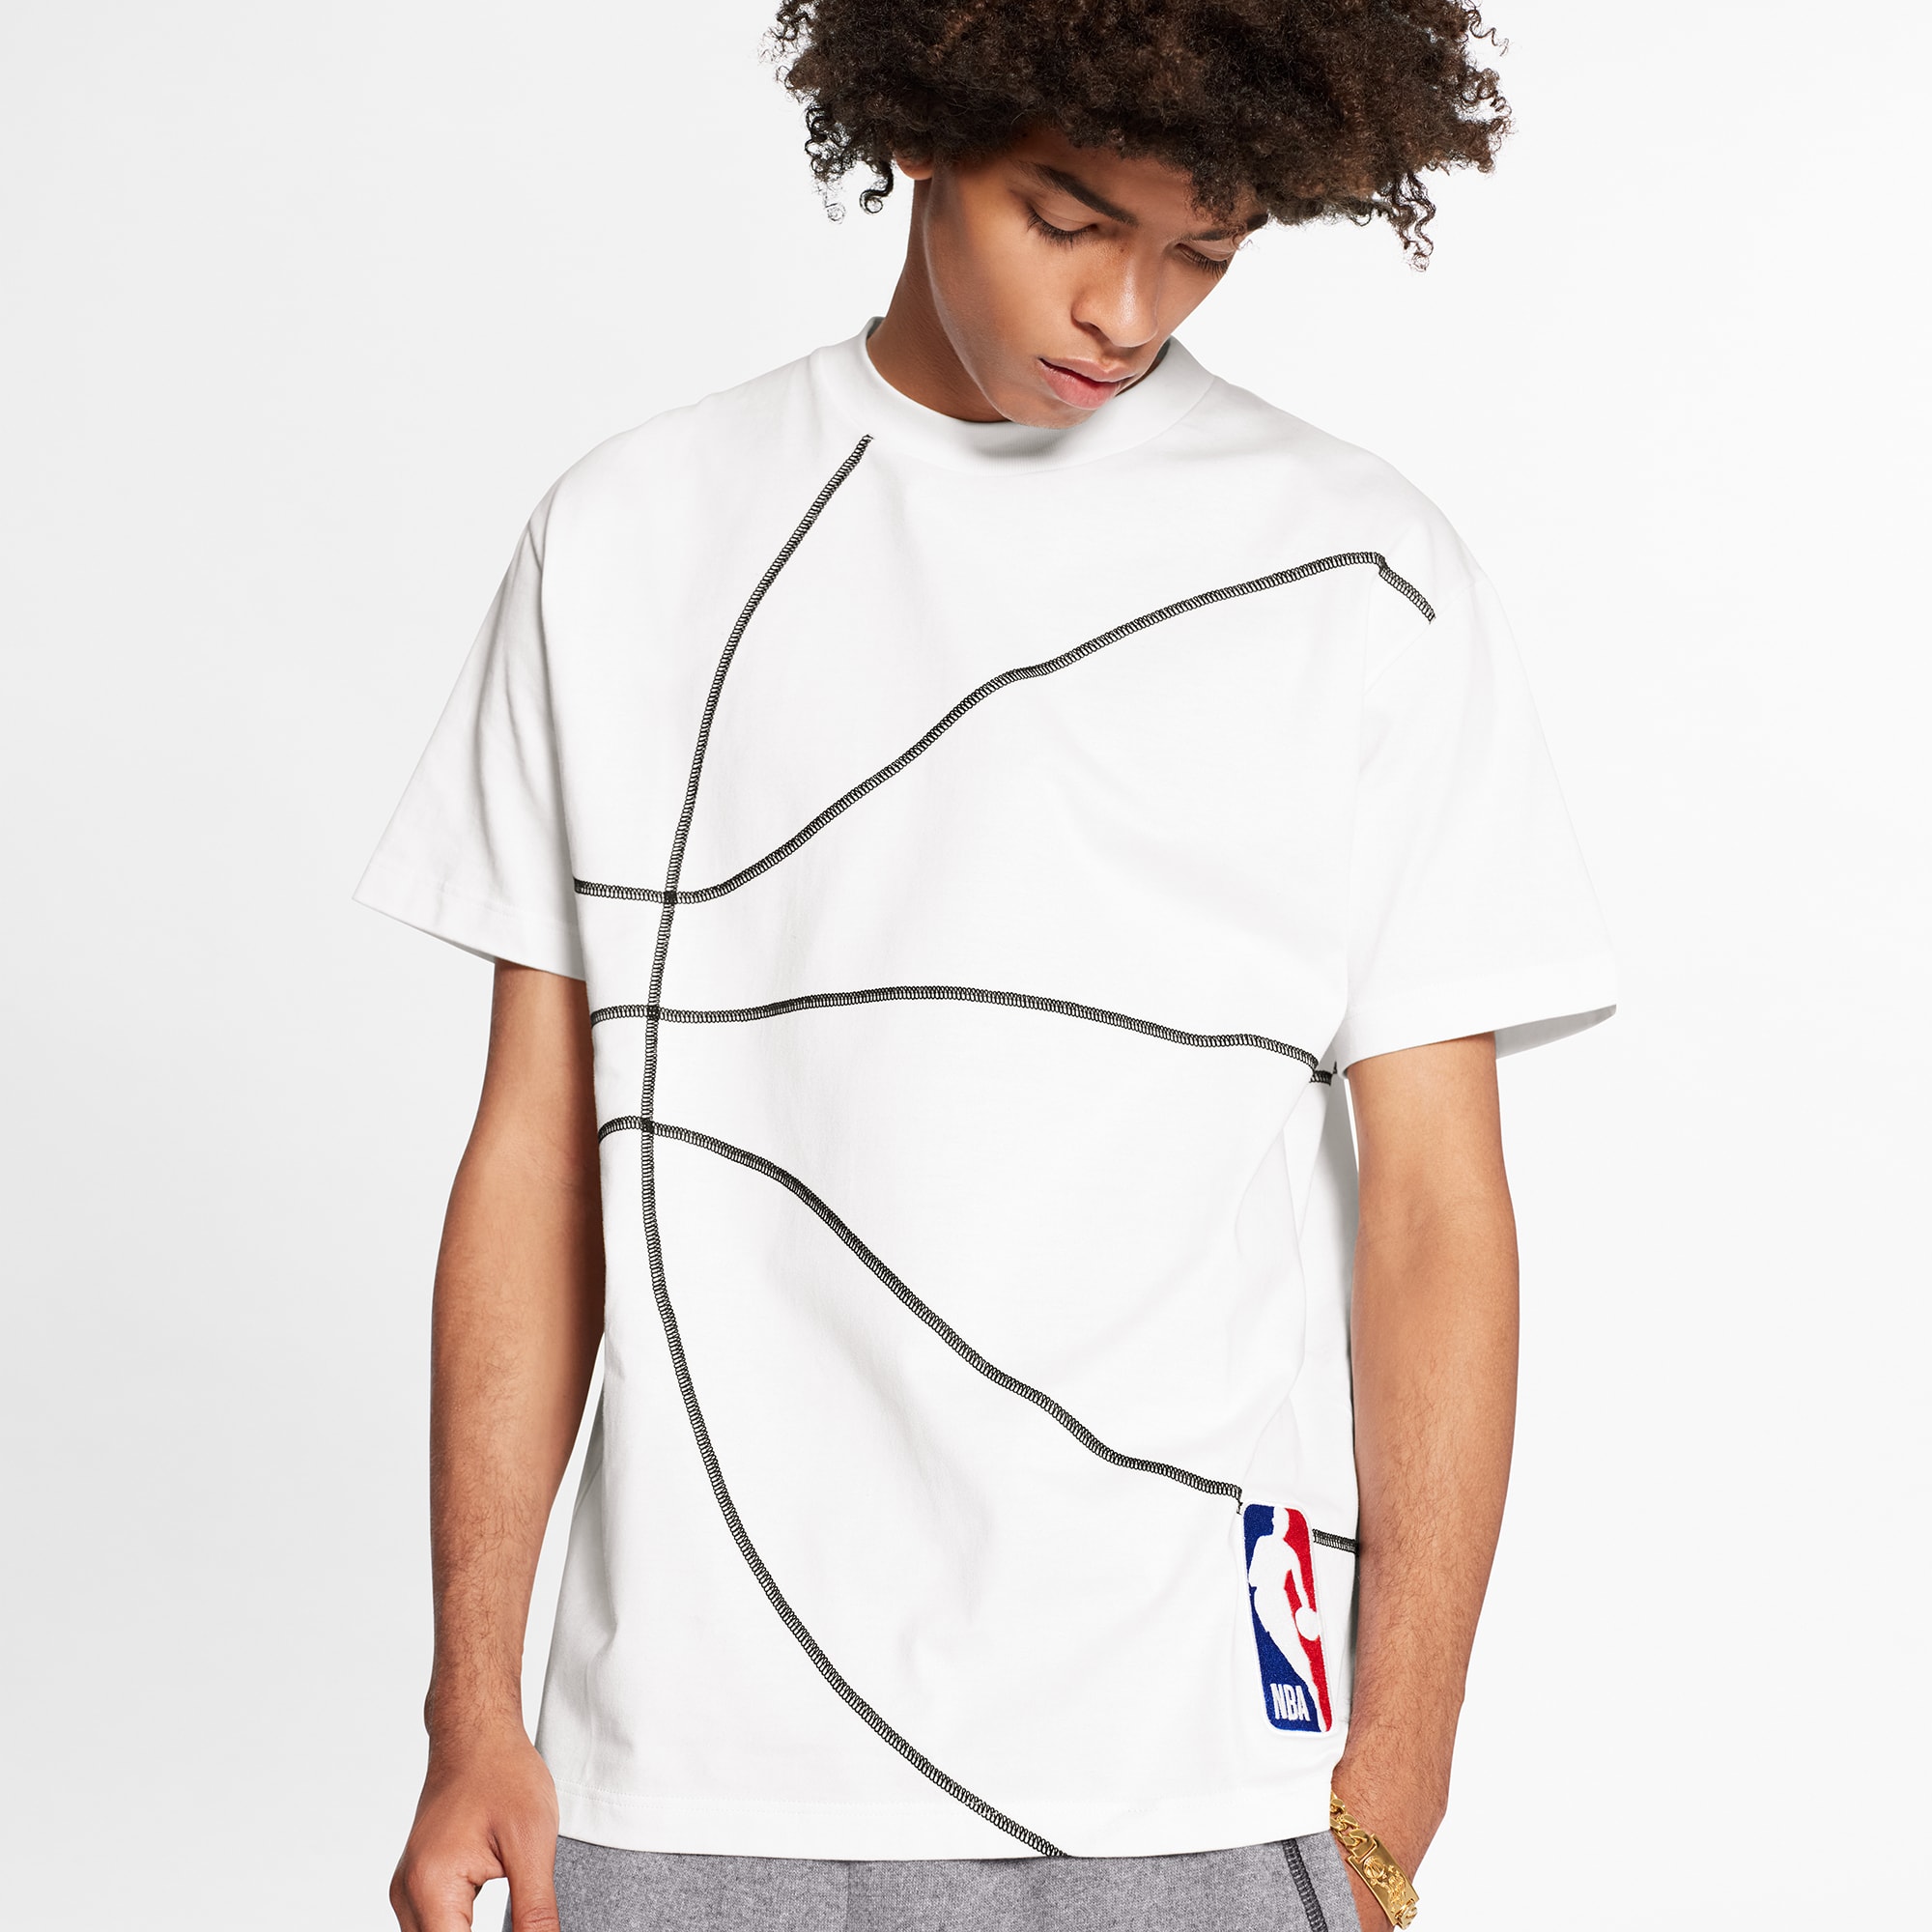 LVxNBA Capsule Collection Launches With MSG Virtual Experience